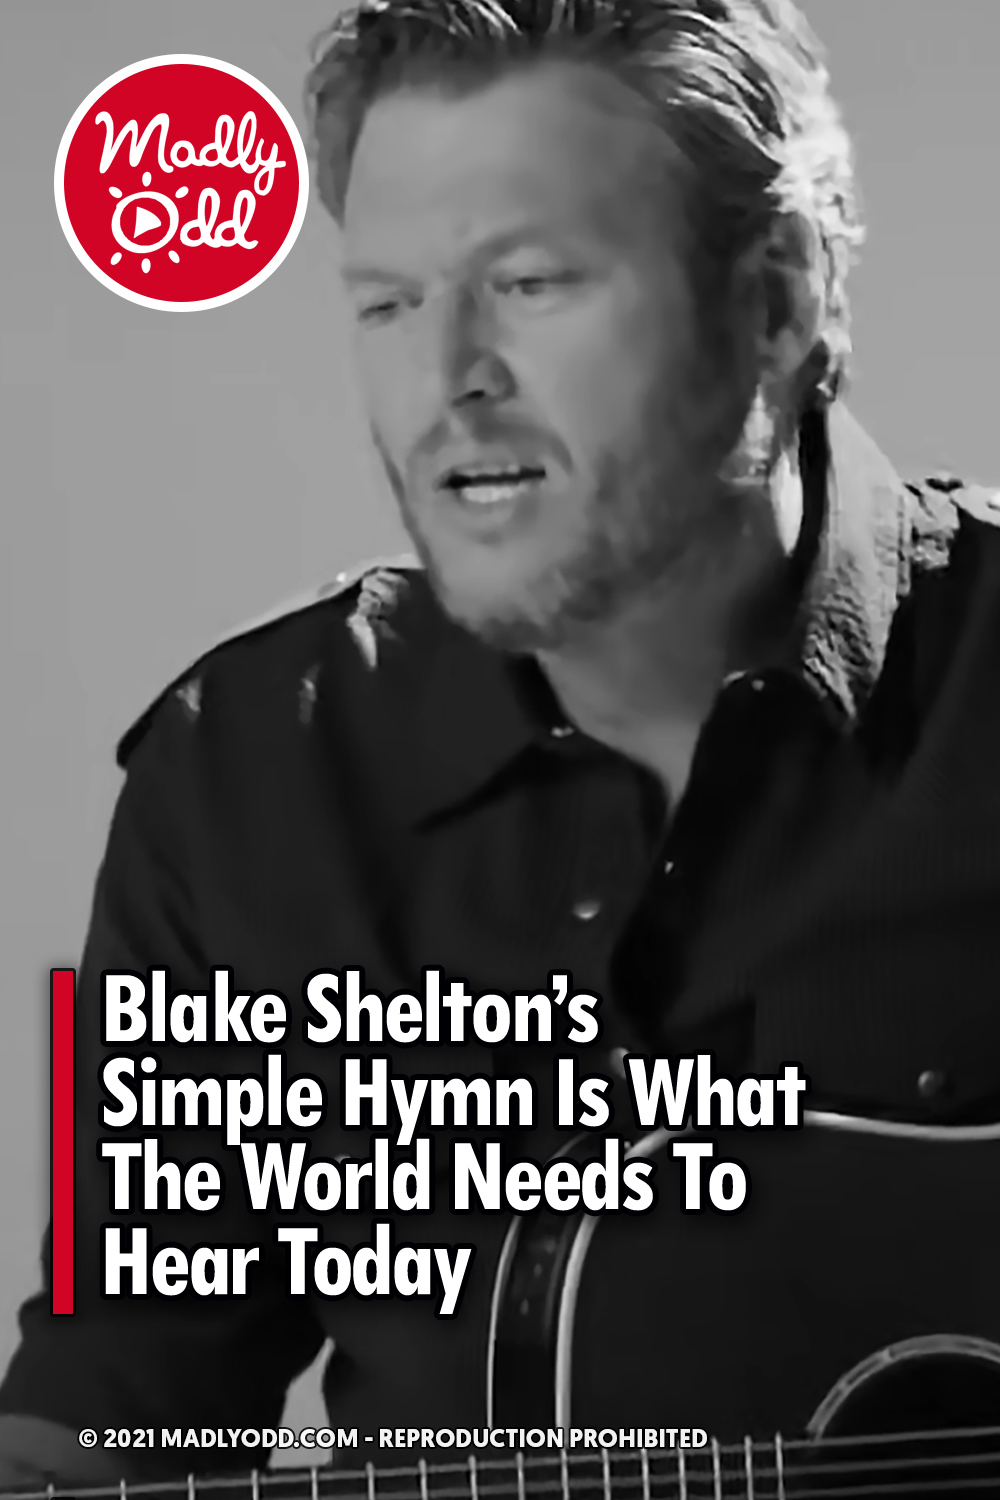 Blake Shelton’s Simple Hymn Is What The World Needs To Hear Today